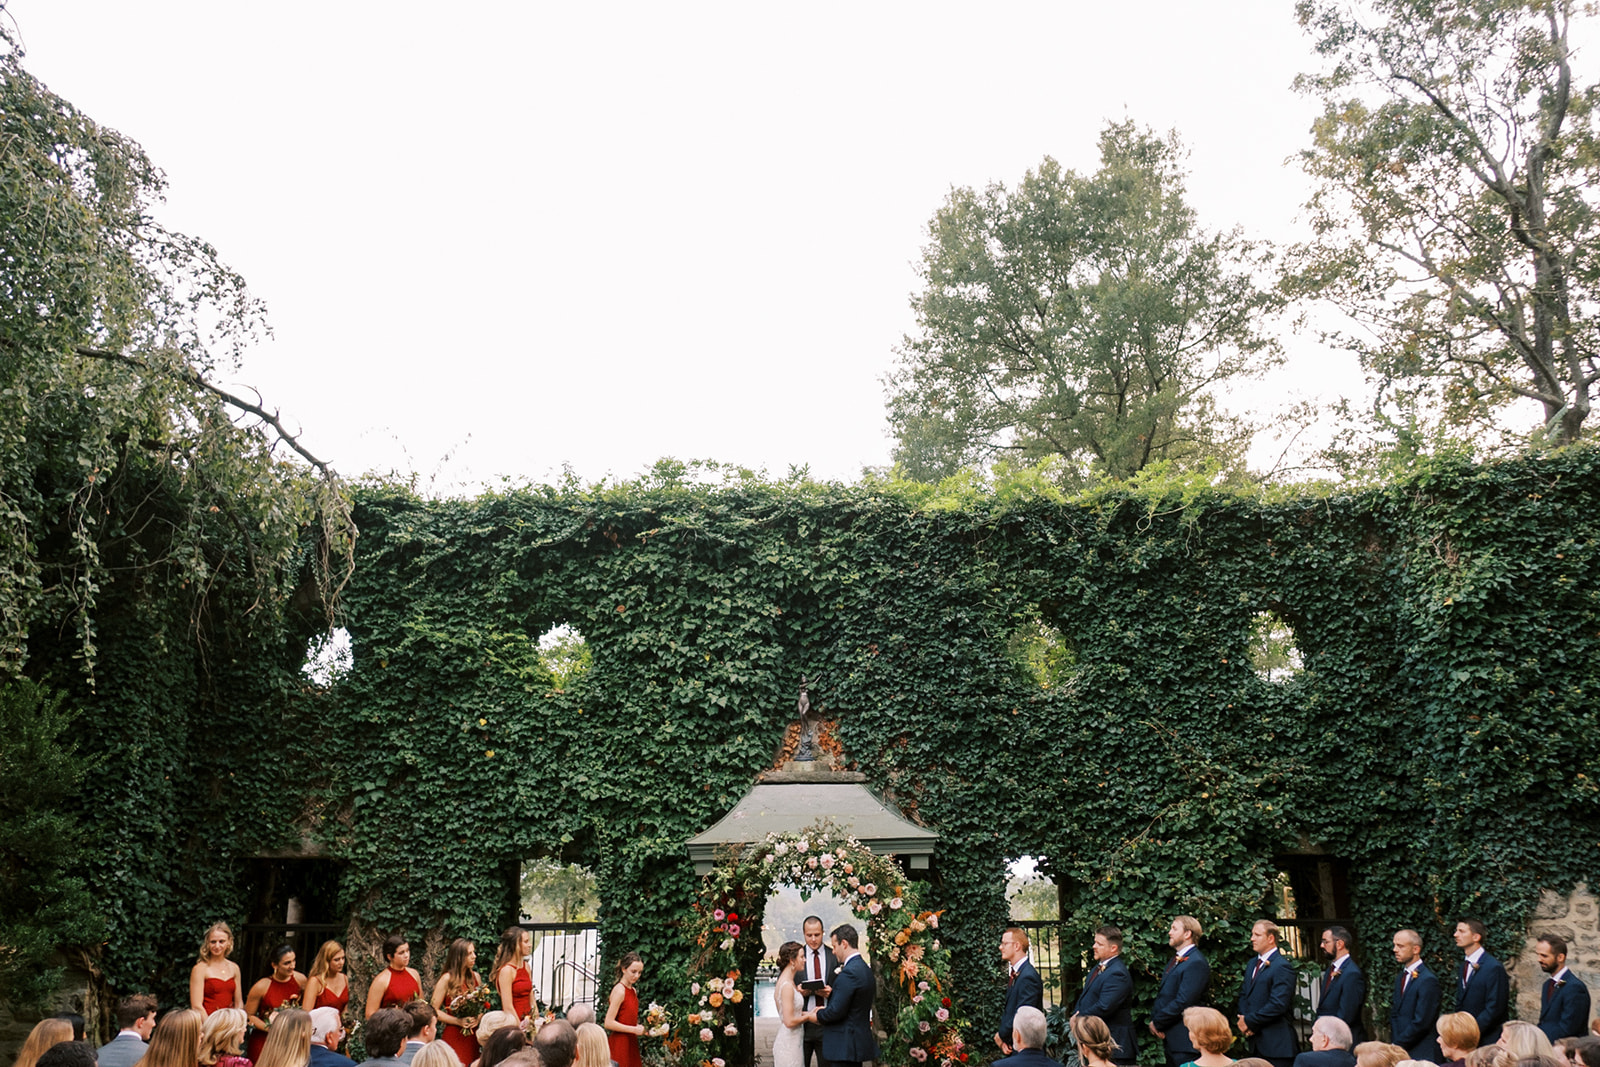 wedding party lined up in front of the ivy wall at Goodstone wedding